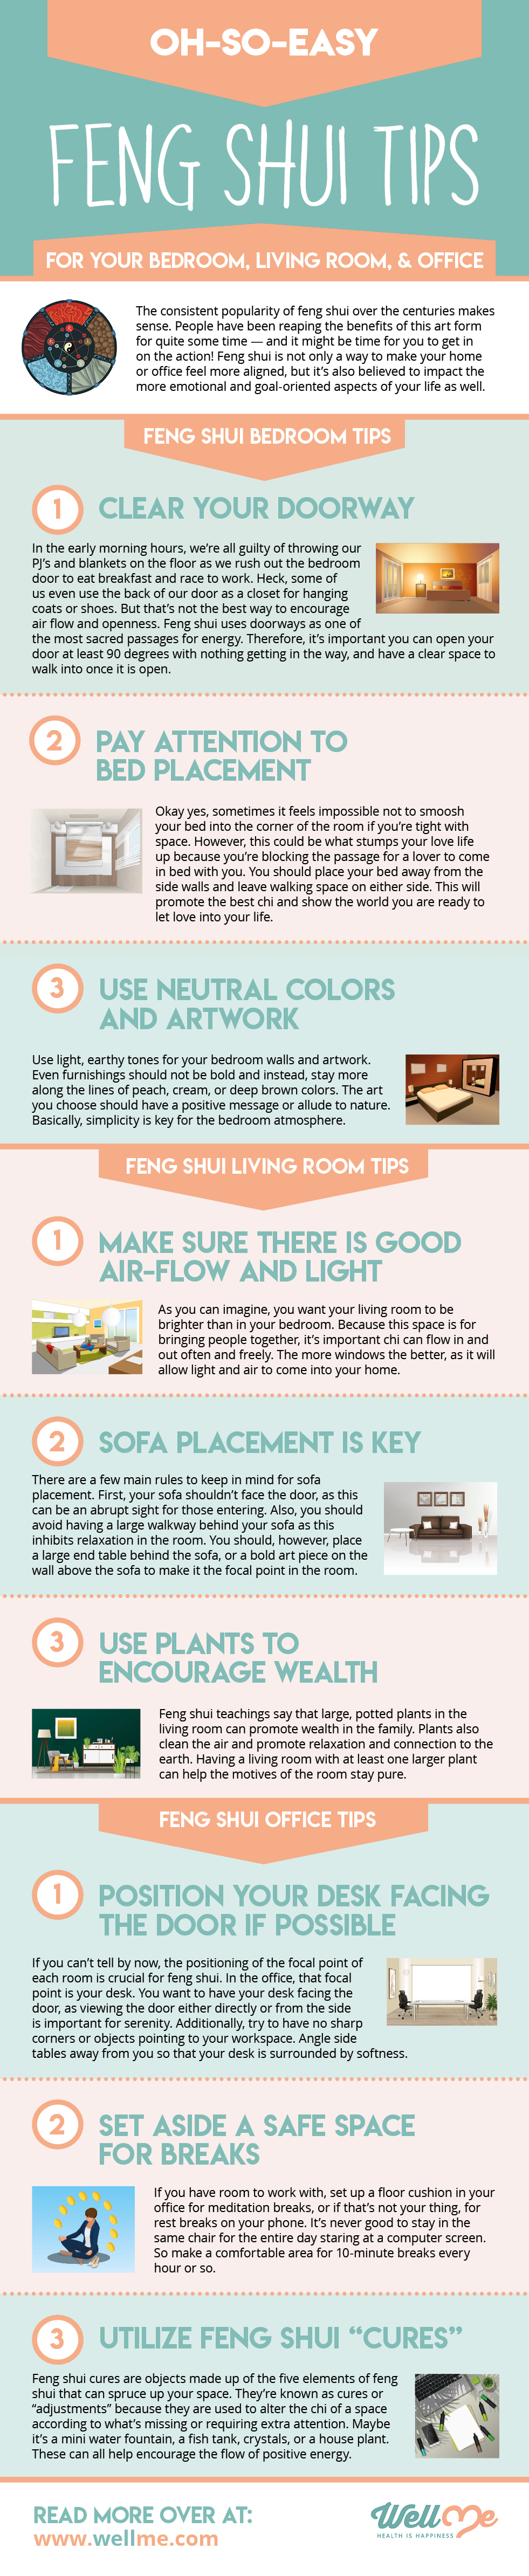 Oh-So-Easy Feng Shui Tips For Your Bedroom, Living Room, and Office